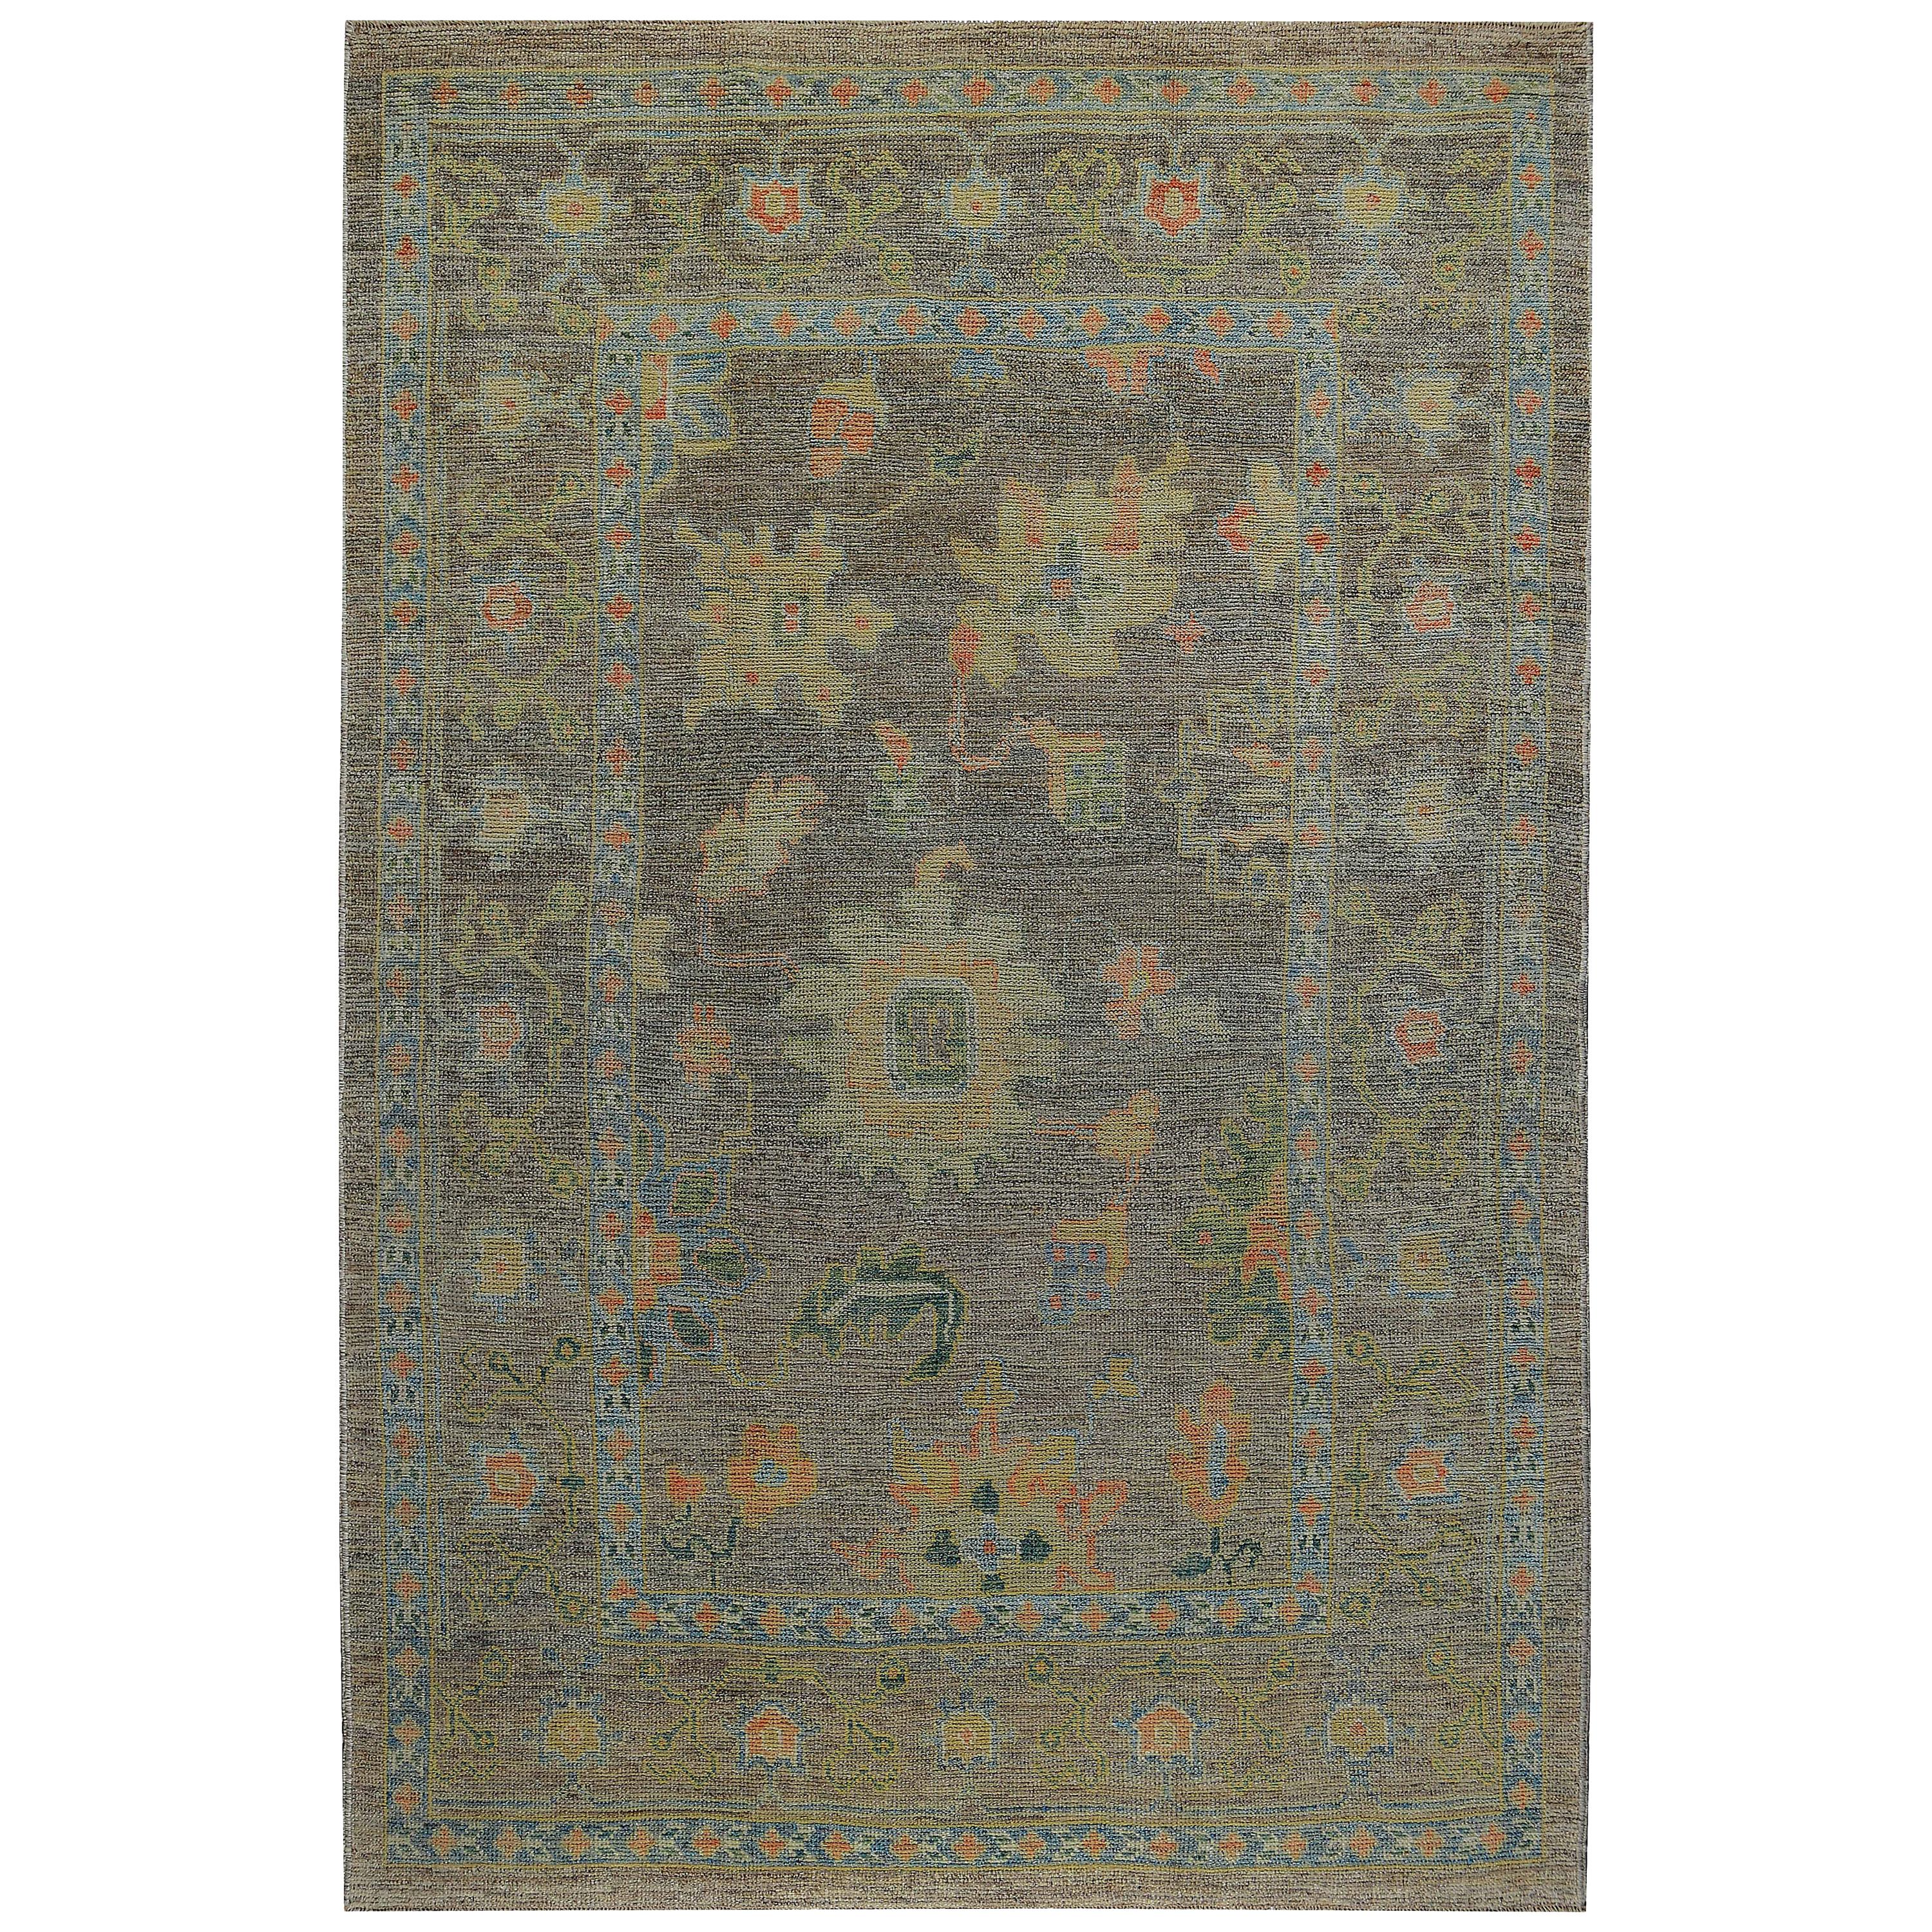 New Turkish rug made of handwoven sheep’s wool of the finest quality. It’s colored with organic vegetable dyes that are certified safe for humans and pets alike. It features green and pink floral details on a lovely brown field. Flower patterns are